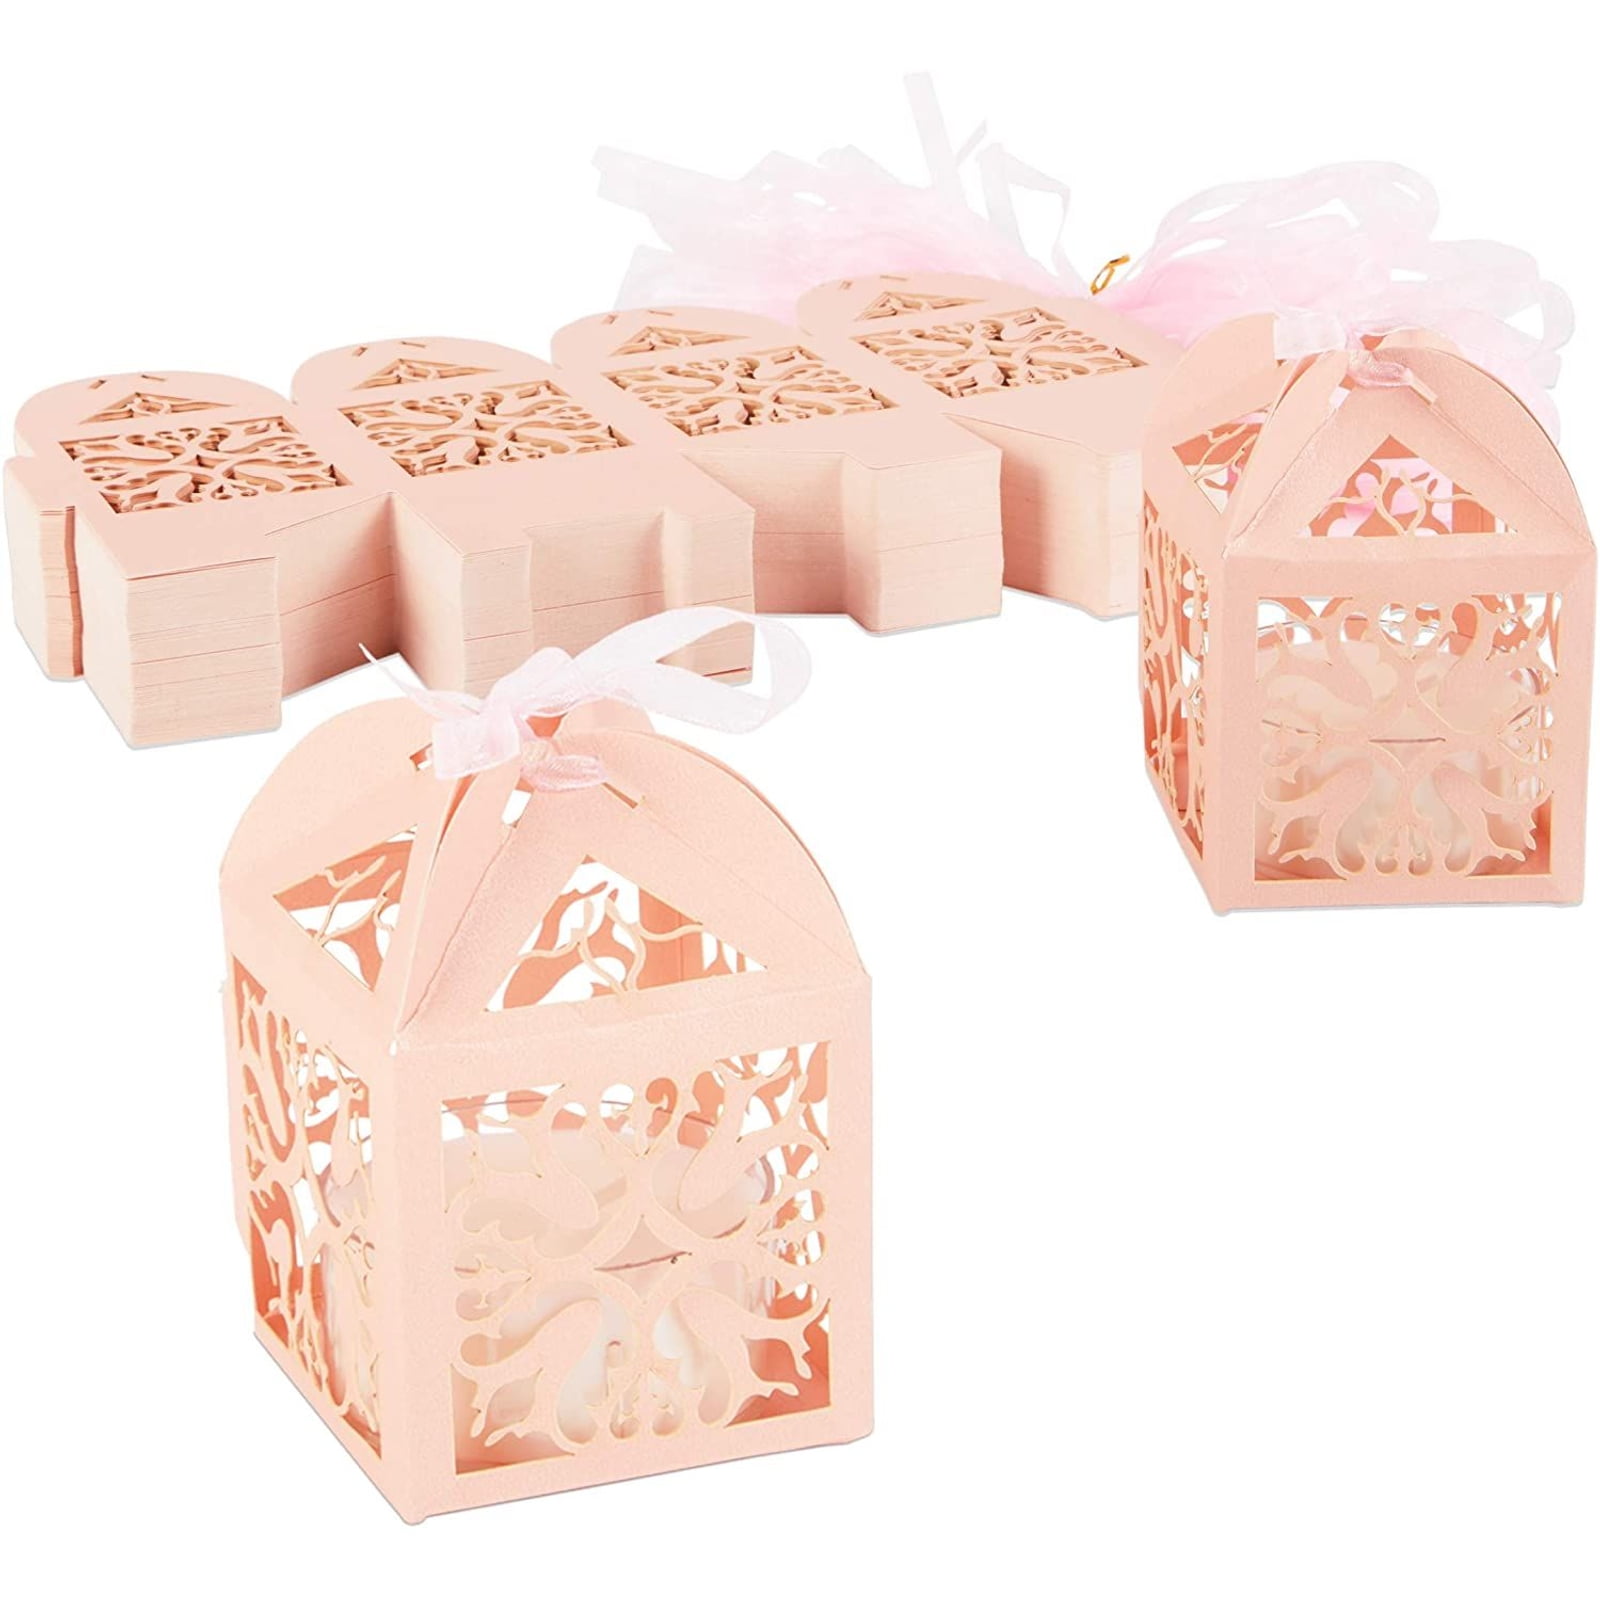 20x Hollow Out Laser Cut Candy Box Wedding Shower Party Gift Favor Bag w/ Ribbon 